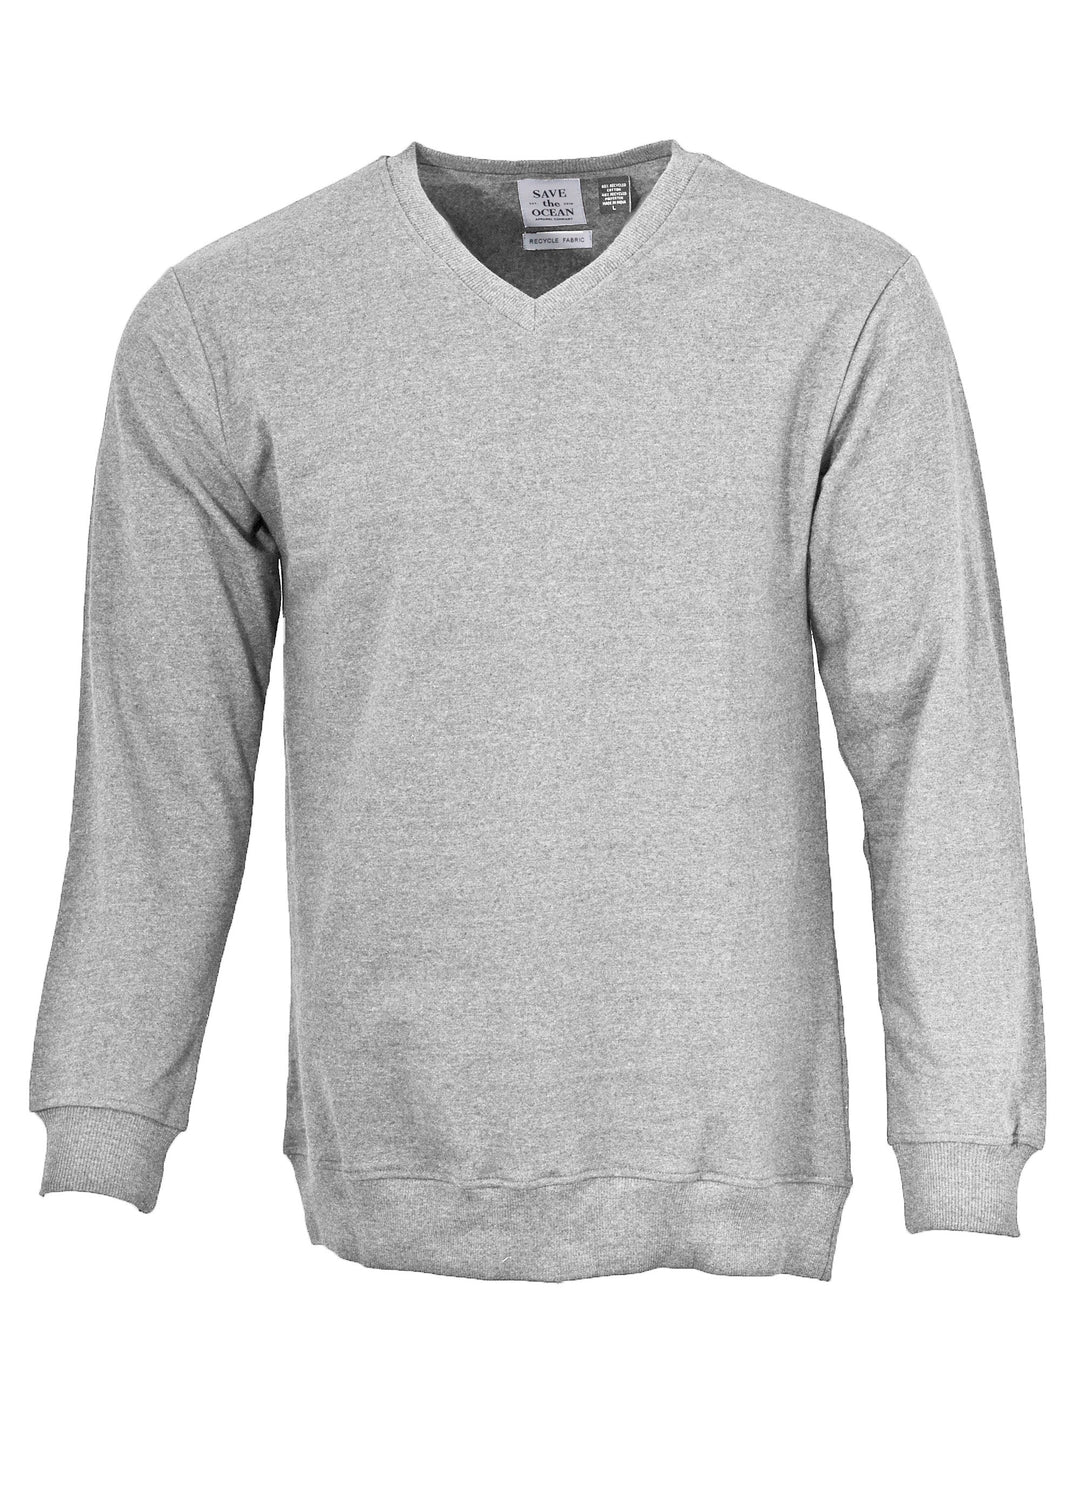 Save The Ocean Recycled V-Neck Sweater